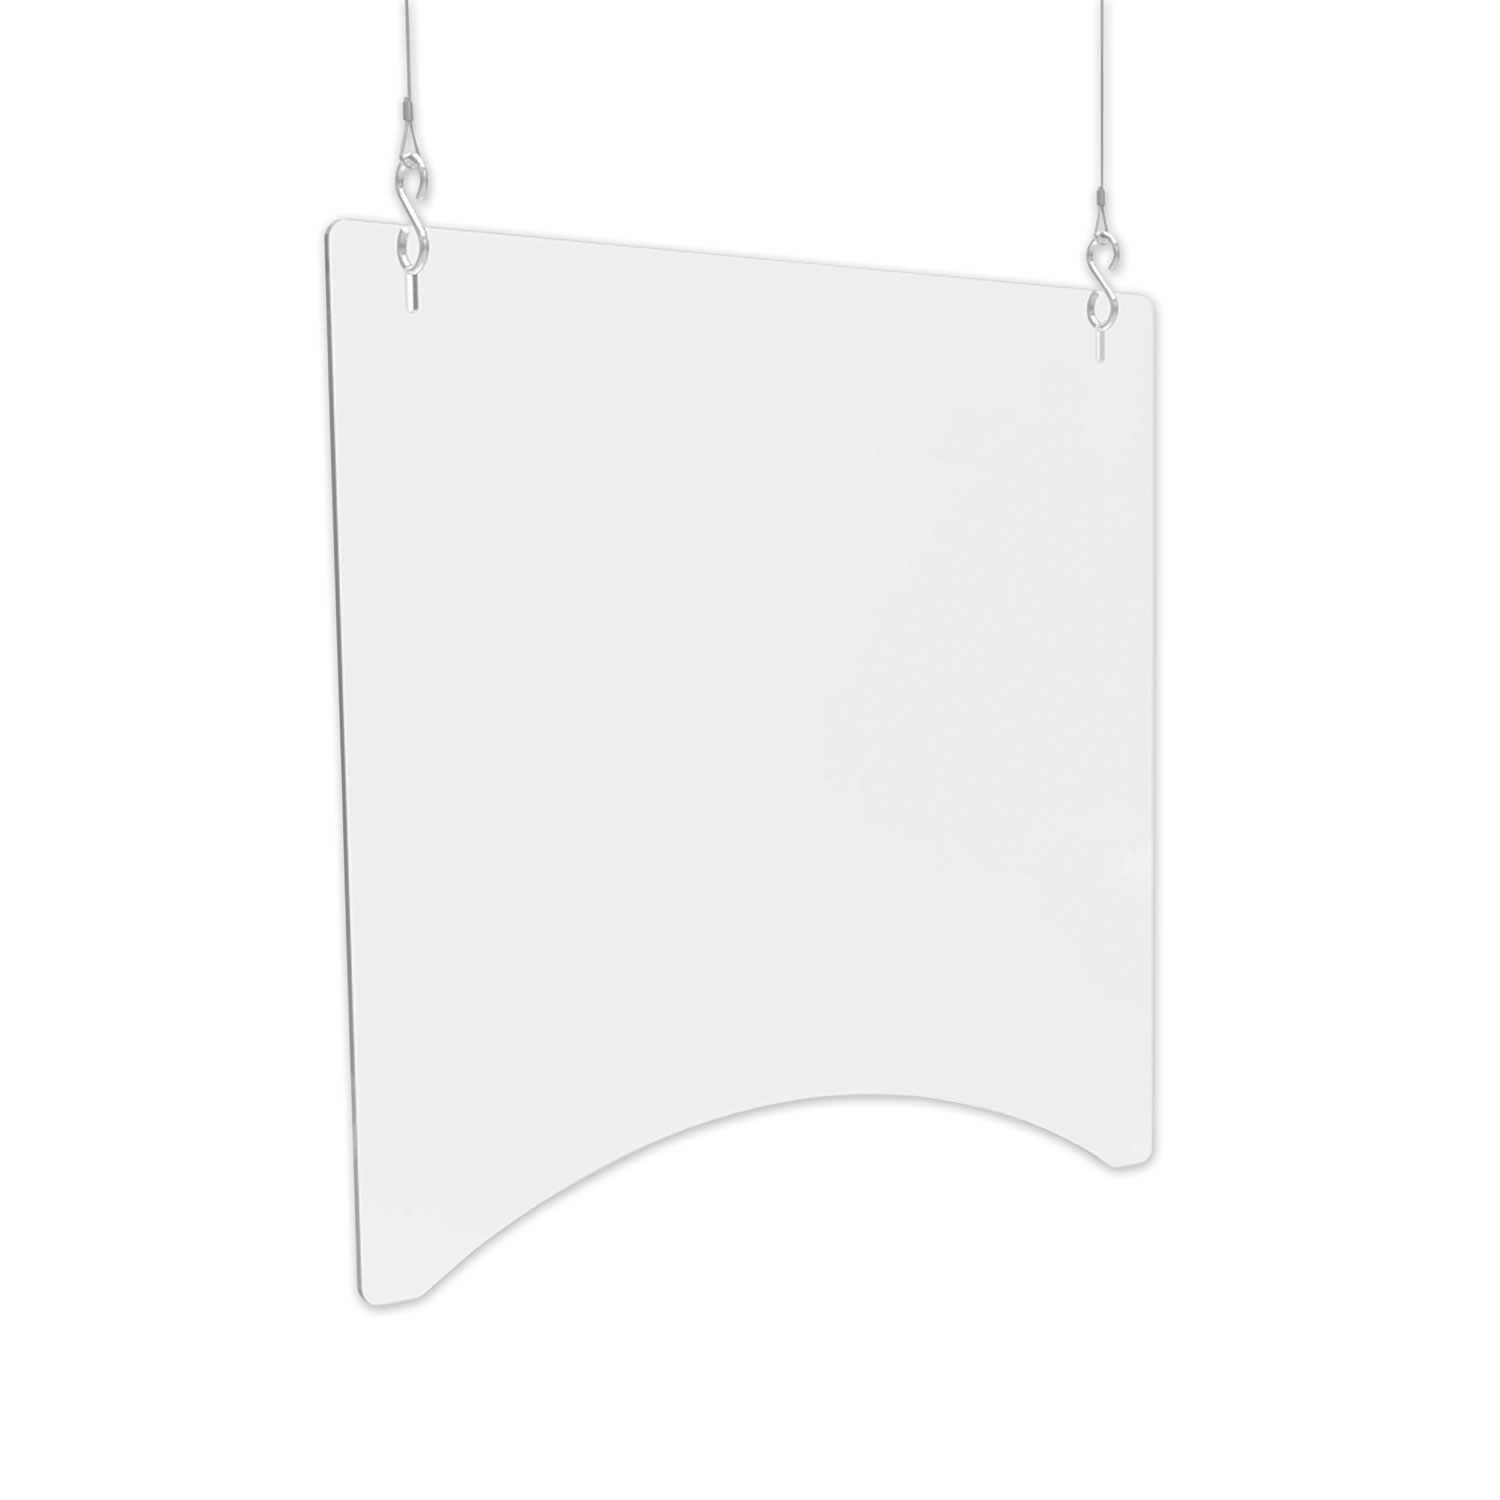  deflecto PBCHPC2424 Hanging Barrier, 23.75 x 23.75, Polycarbonate, Clear, 2/Carton (DEFPBCHPC2424) 